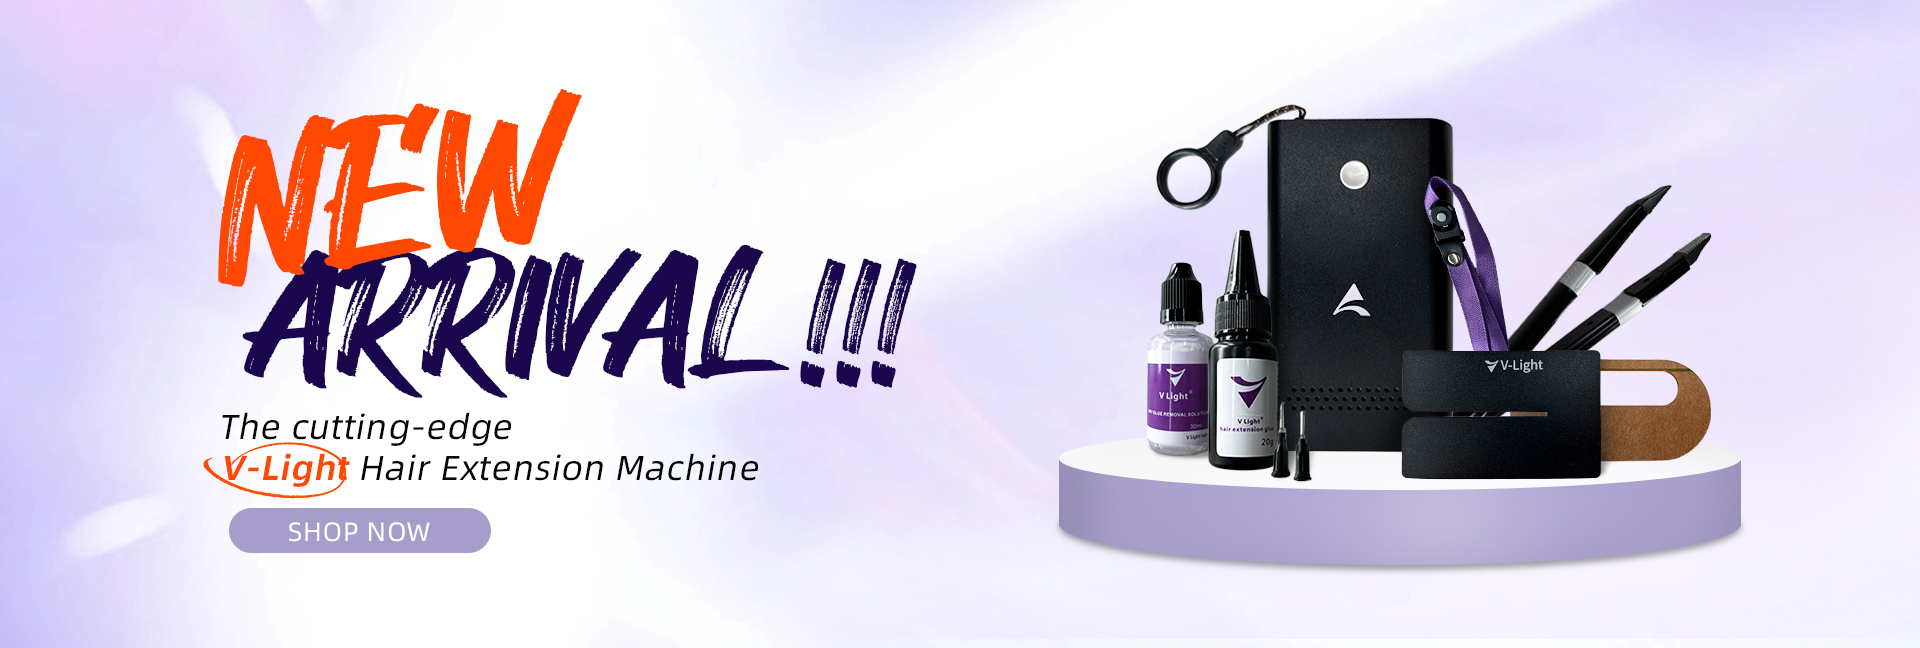 NEW ARRIVAL !!!   The cutting-edge V-Light Hair Extension Machine